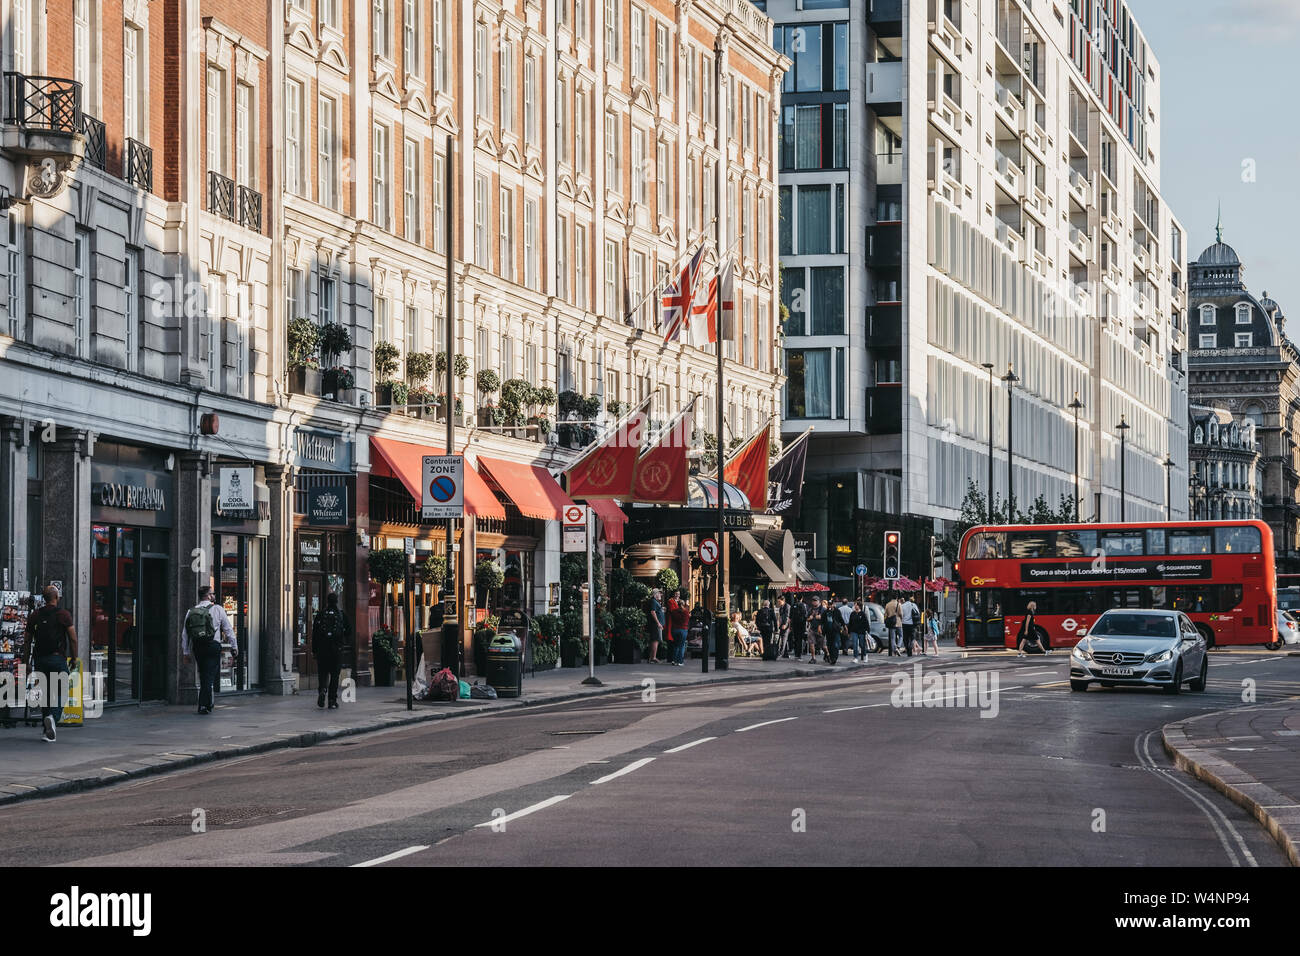 London, UK - July 15, 2019: People walking past the shops and hotel on Buckingham Palace Road, a famous street in Victoria, London, that runs from Buc Stock Photo